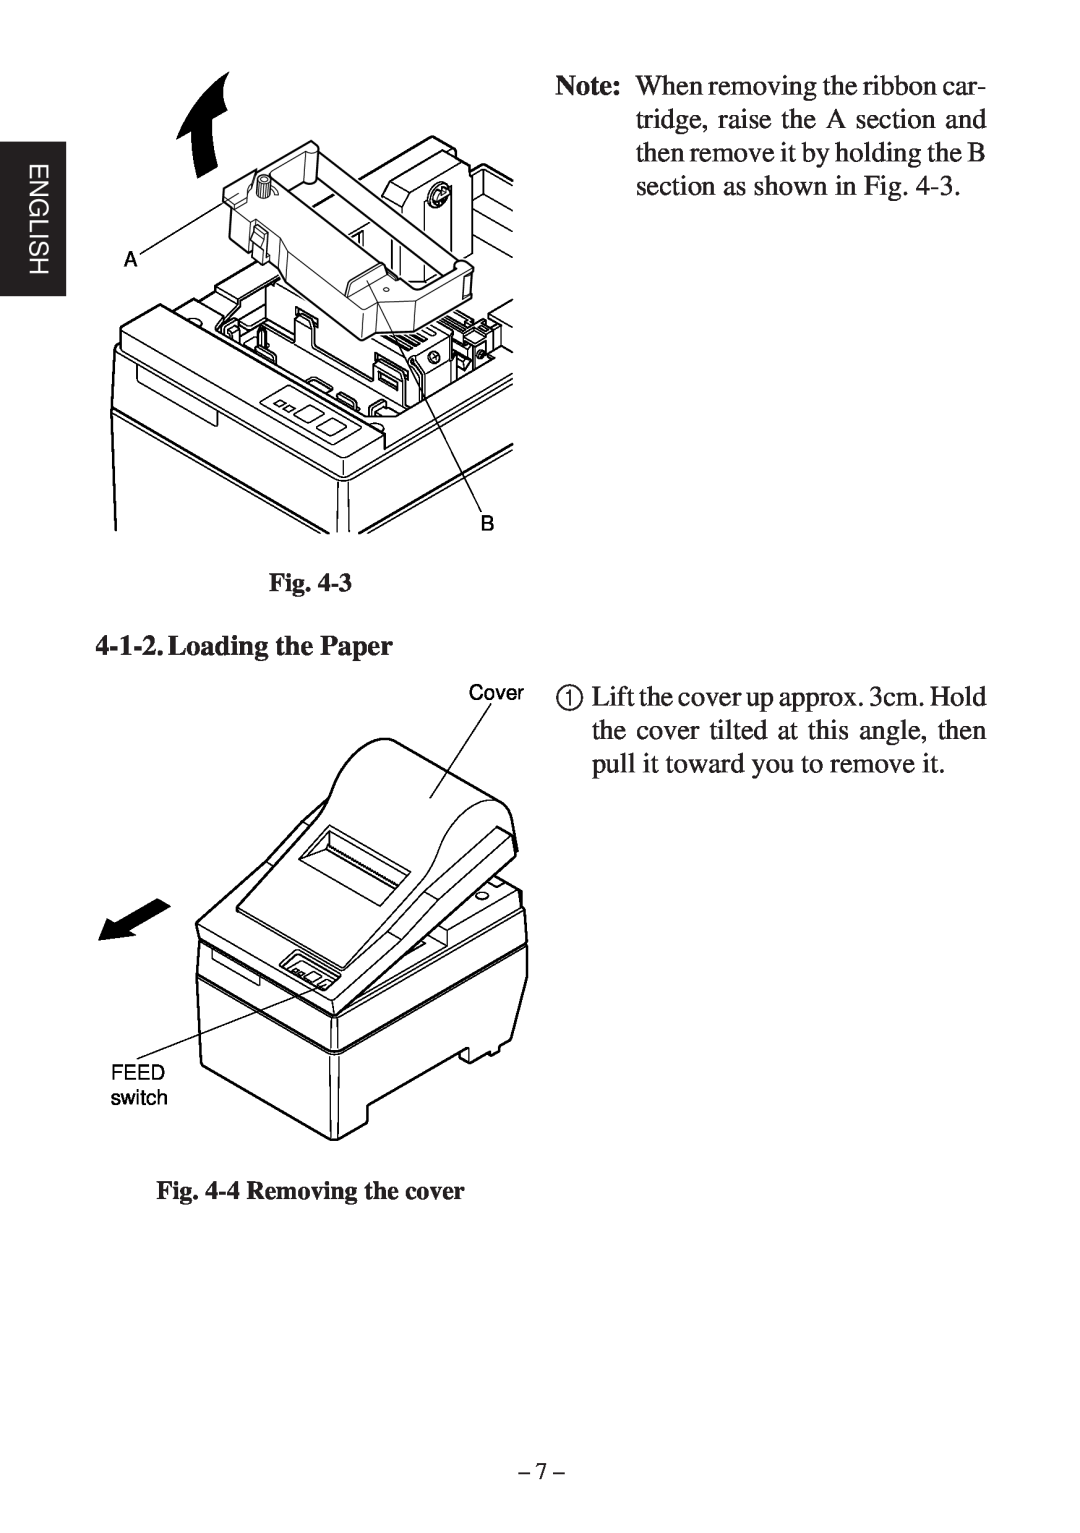 Star Micronics SP200F user manual Loading the Paper, 4 Removing the cover 